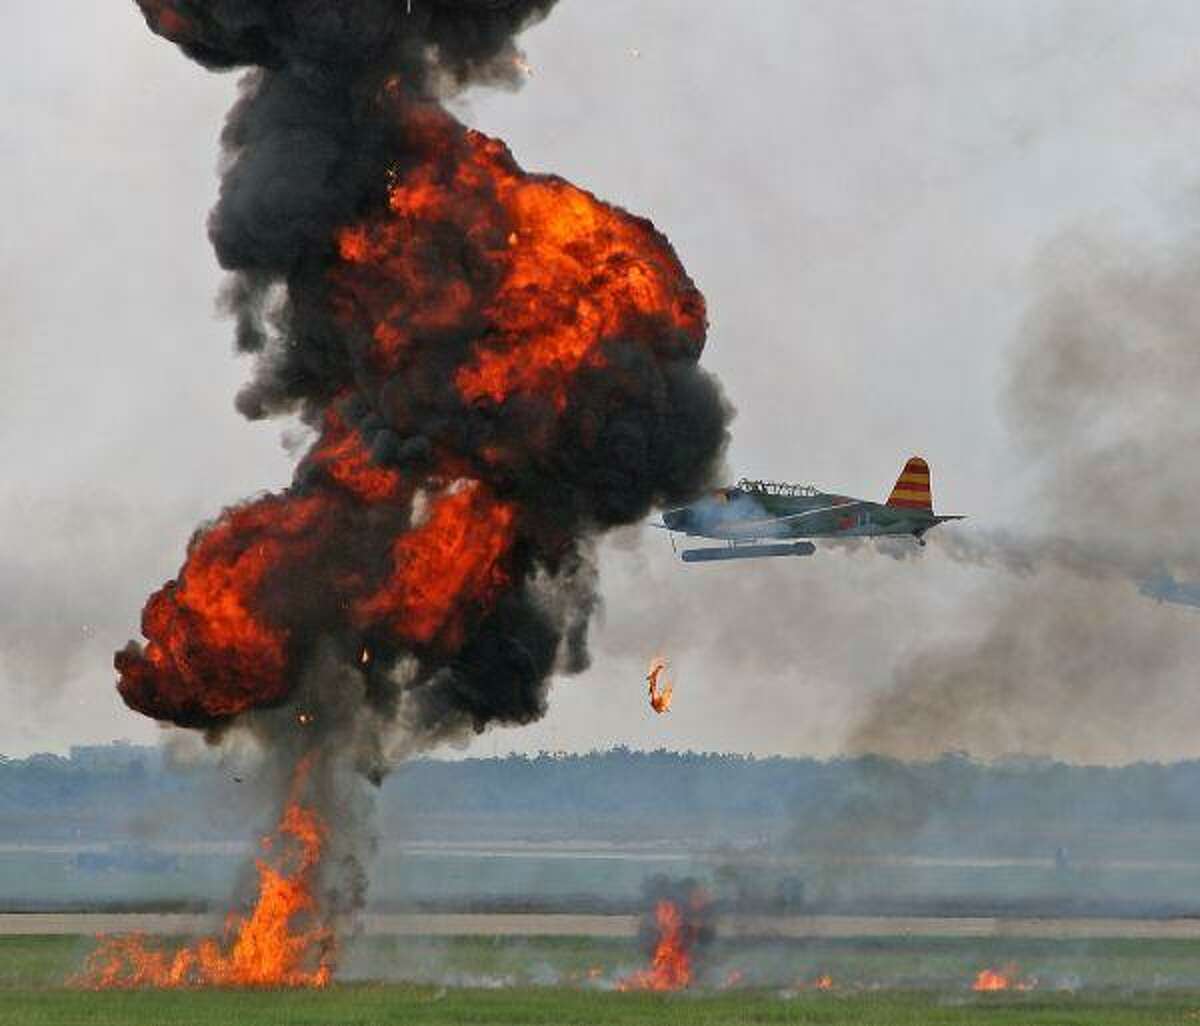 The popular Tora! Tora! Tora! World War II re-enactment will be back again at Wings Over Houston Oct. 23-24.